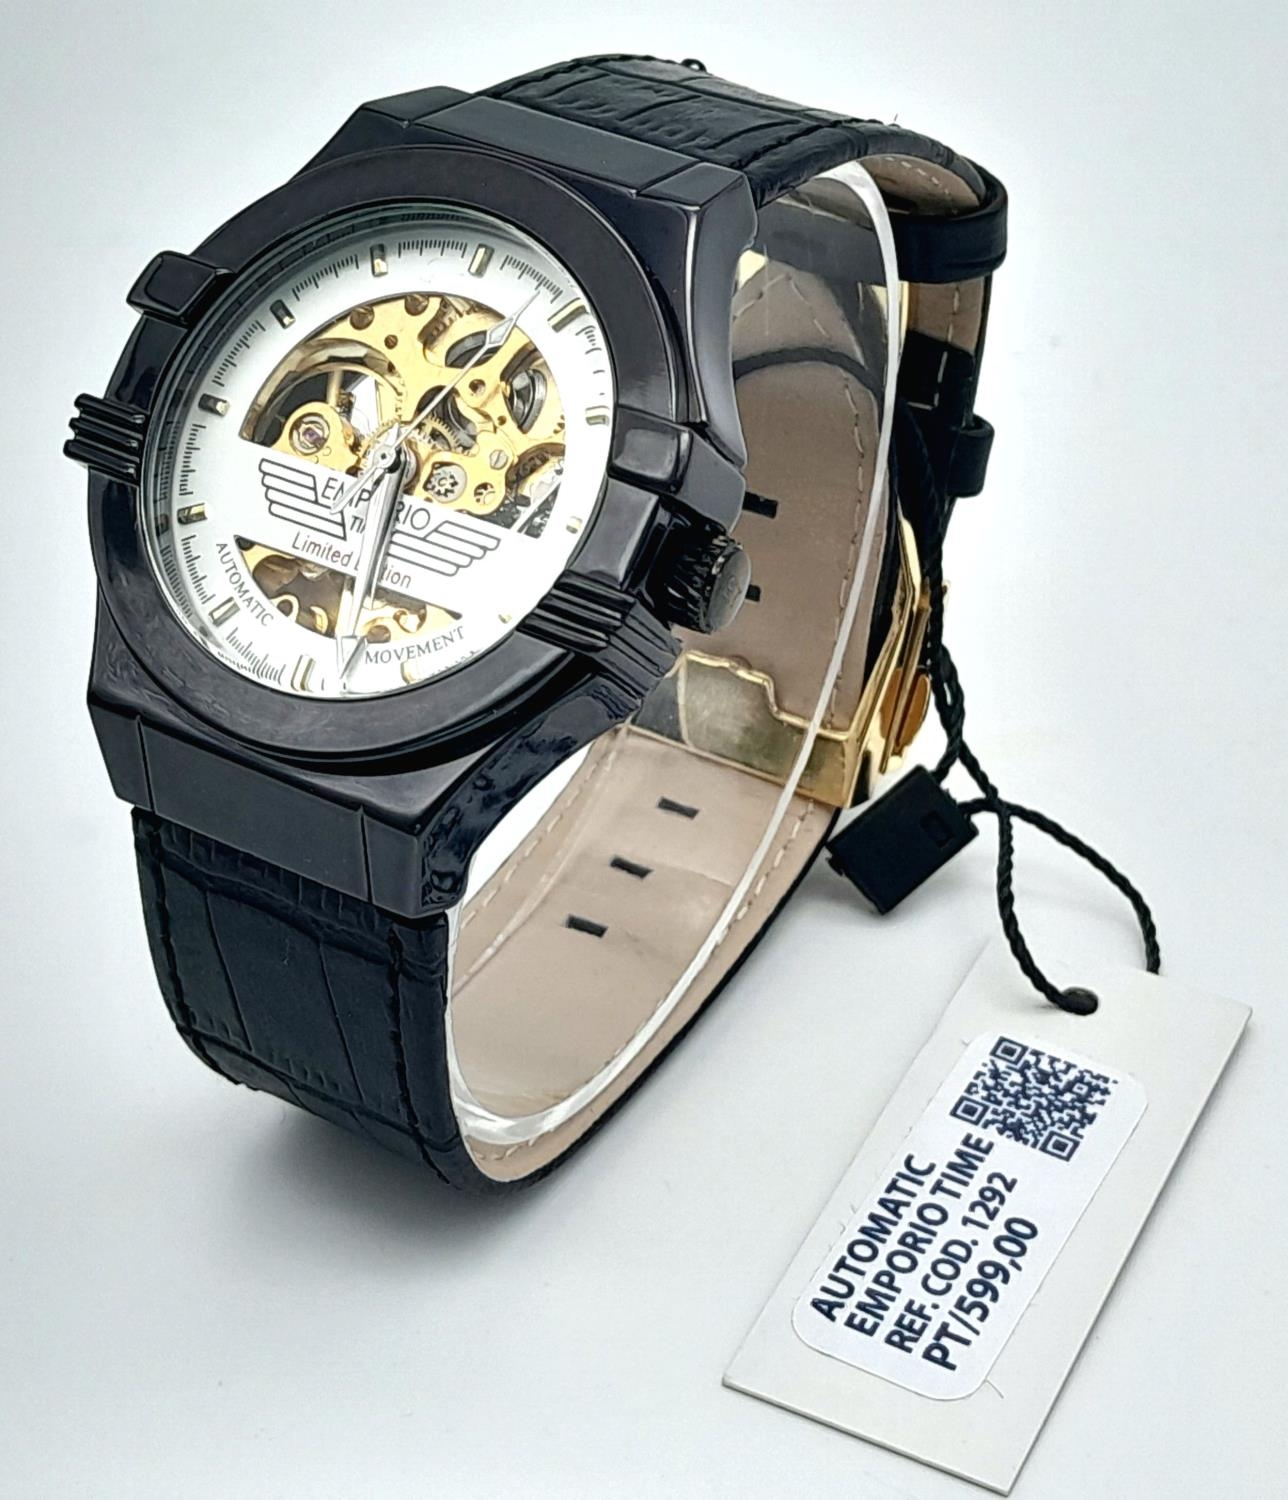 An Emporio Time Limited Edition Automatic Skeleton Gents Watch. Black leather strap. Stainless steel